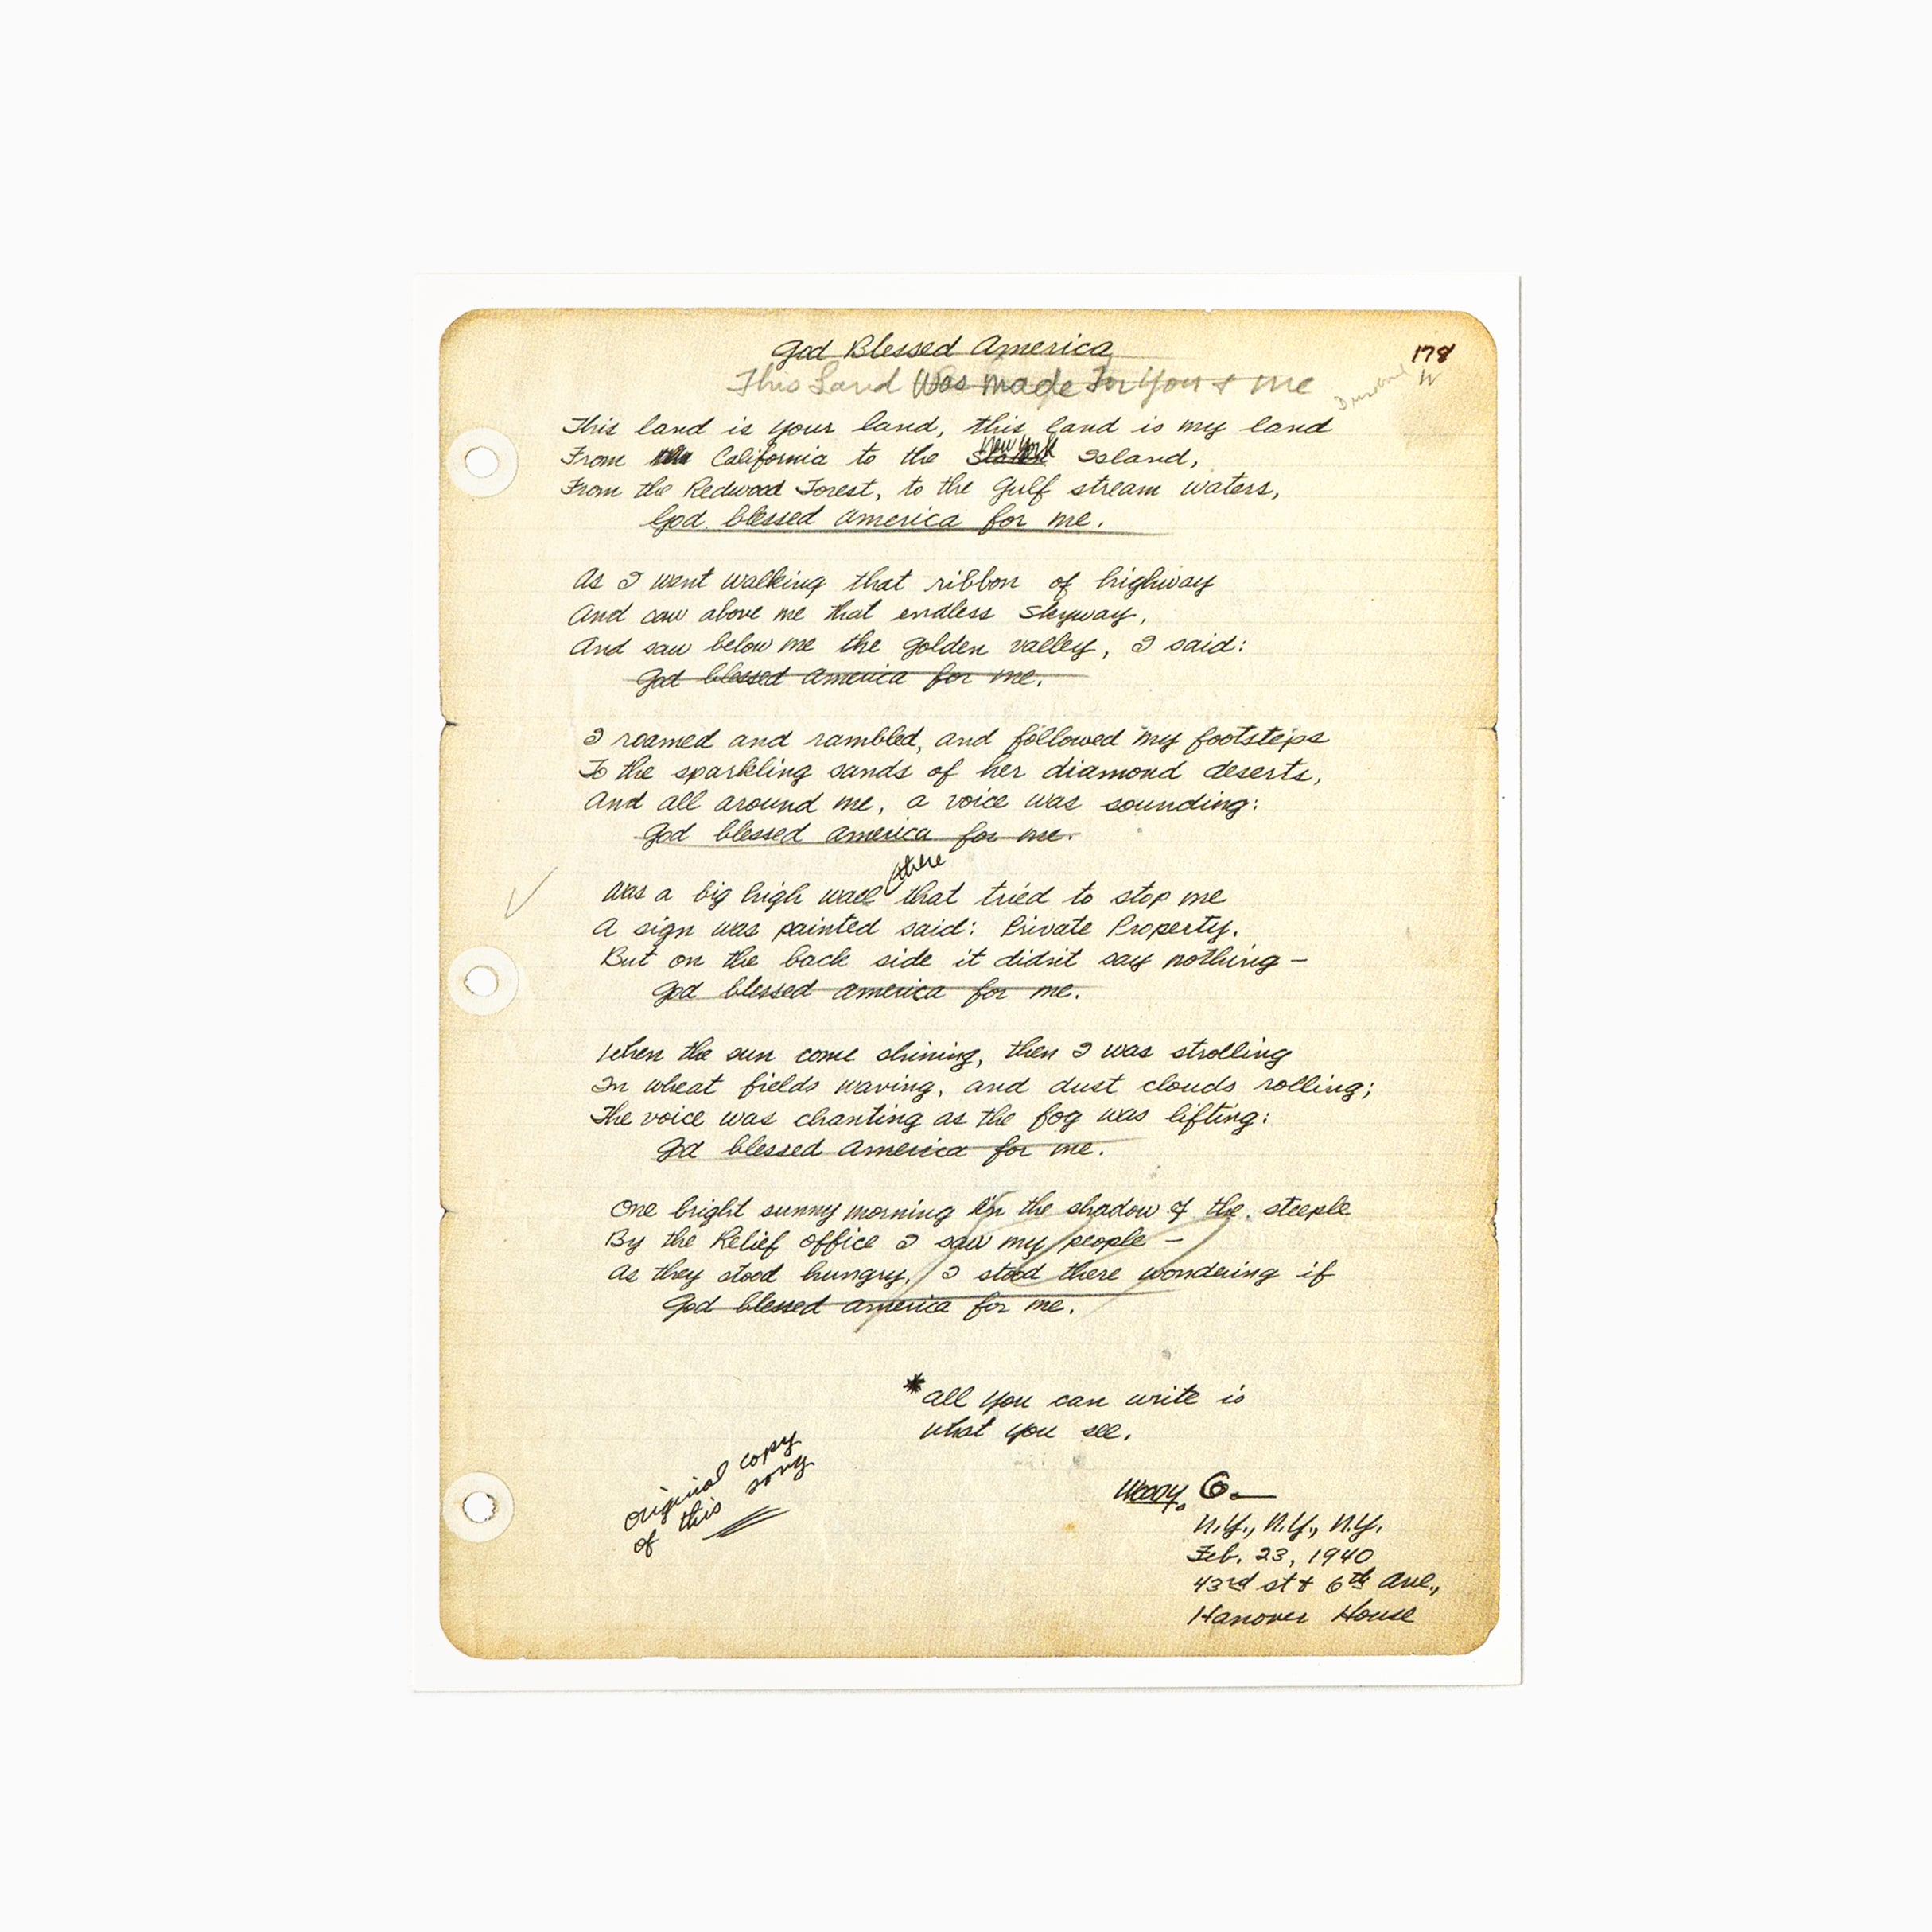 Blackwing Volume 223 Postcards - Woody Guthrie Hand Writen "This Land is Your Land" Lyrics